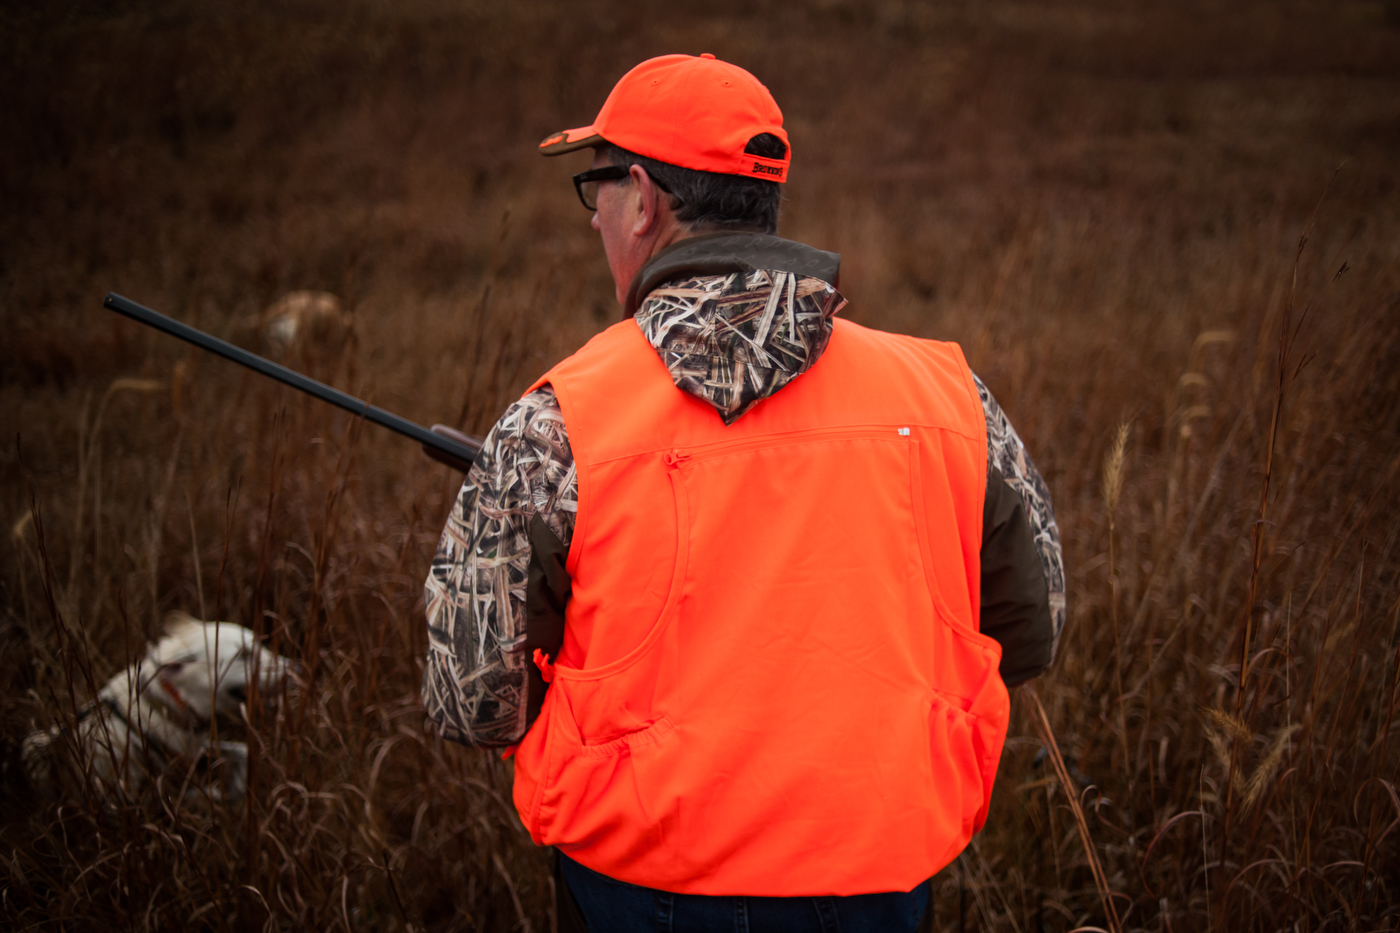  Republican presidential candidate Rick Santorum wades through the deep grass while participating in the Col. Bud Day Pheasant Hunt hosted by Congressman Steve King outside of Akron, Iowa on October 31, 2015.  